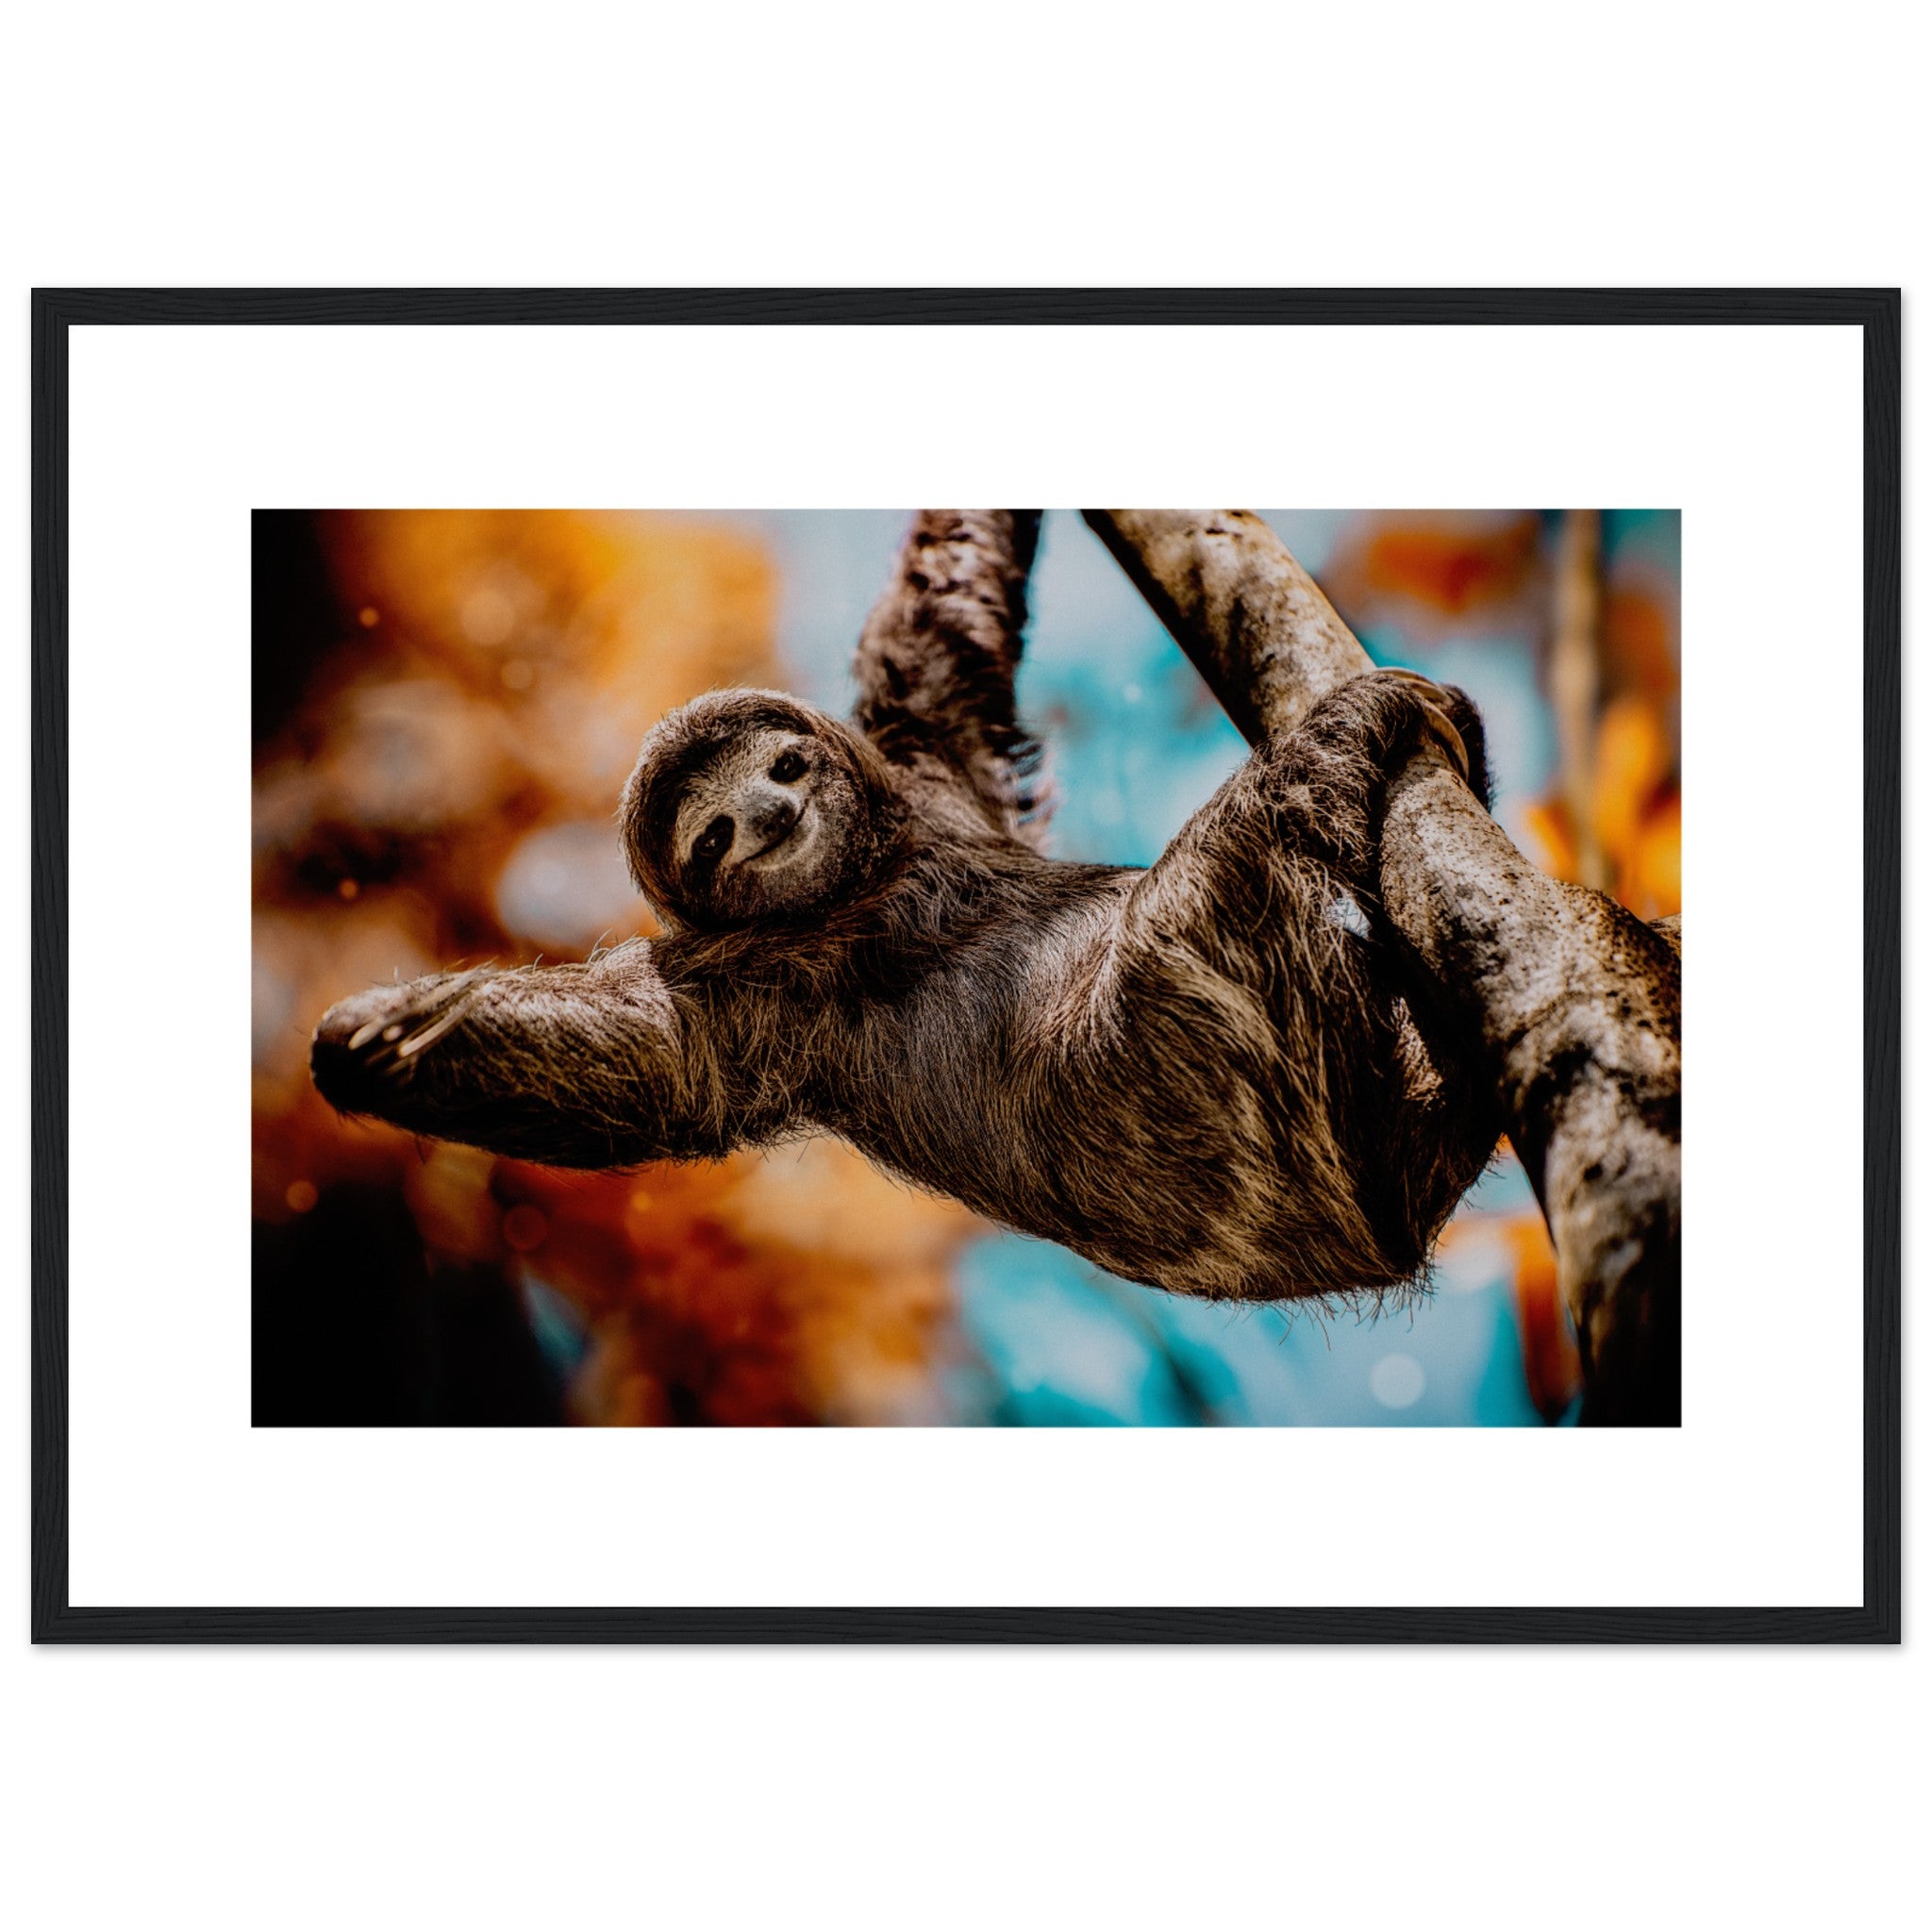 A Happy Sloth Hanging From A Tree In Costa Rica Poster